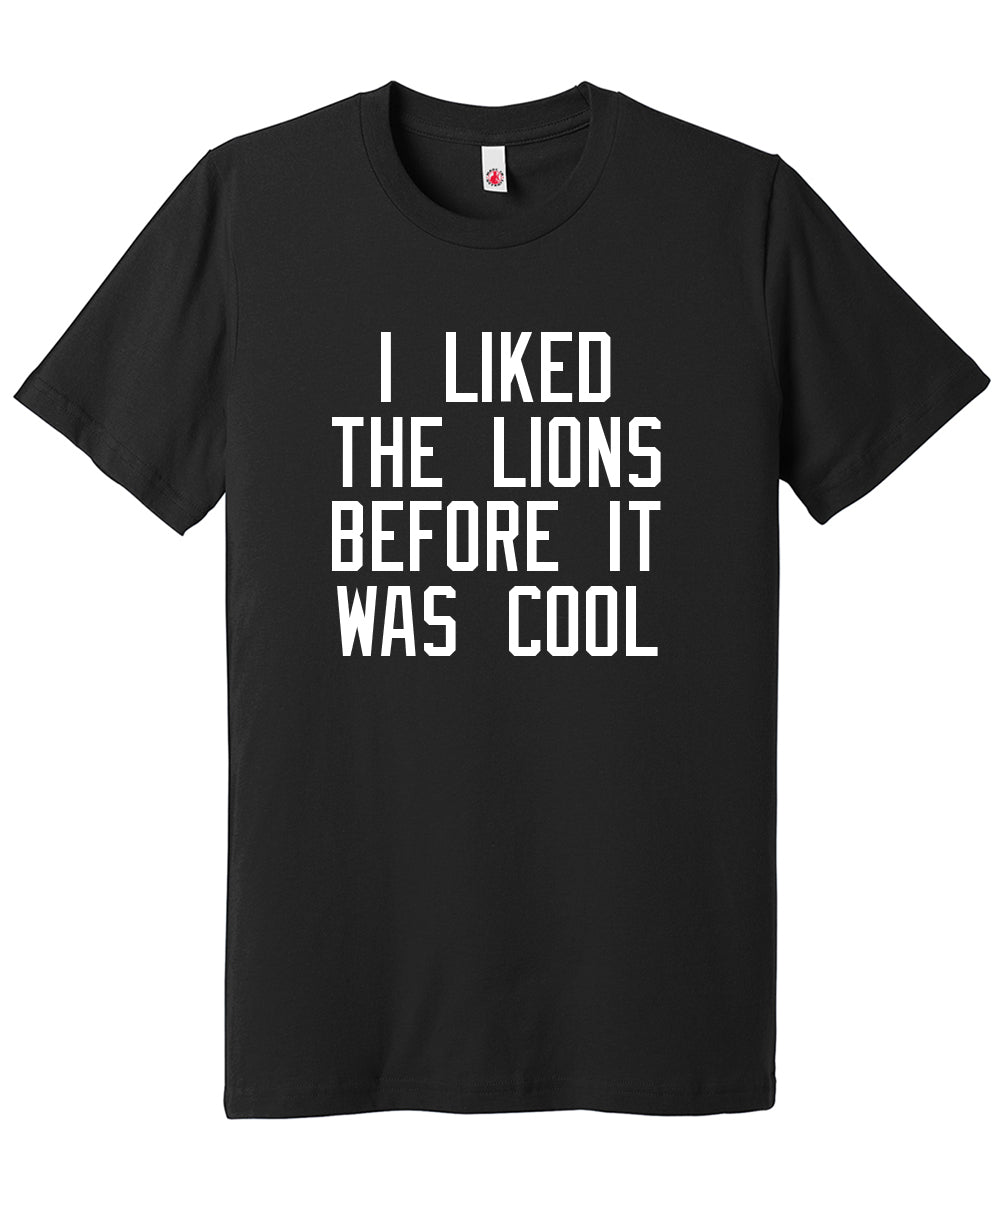 I Liked the Lions Before It Was Cool